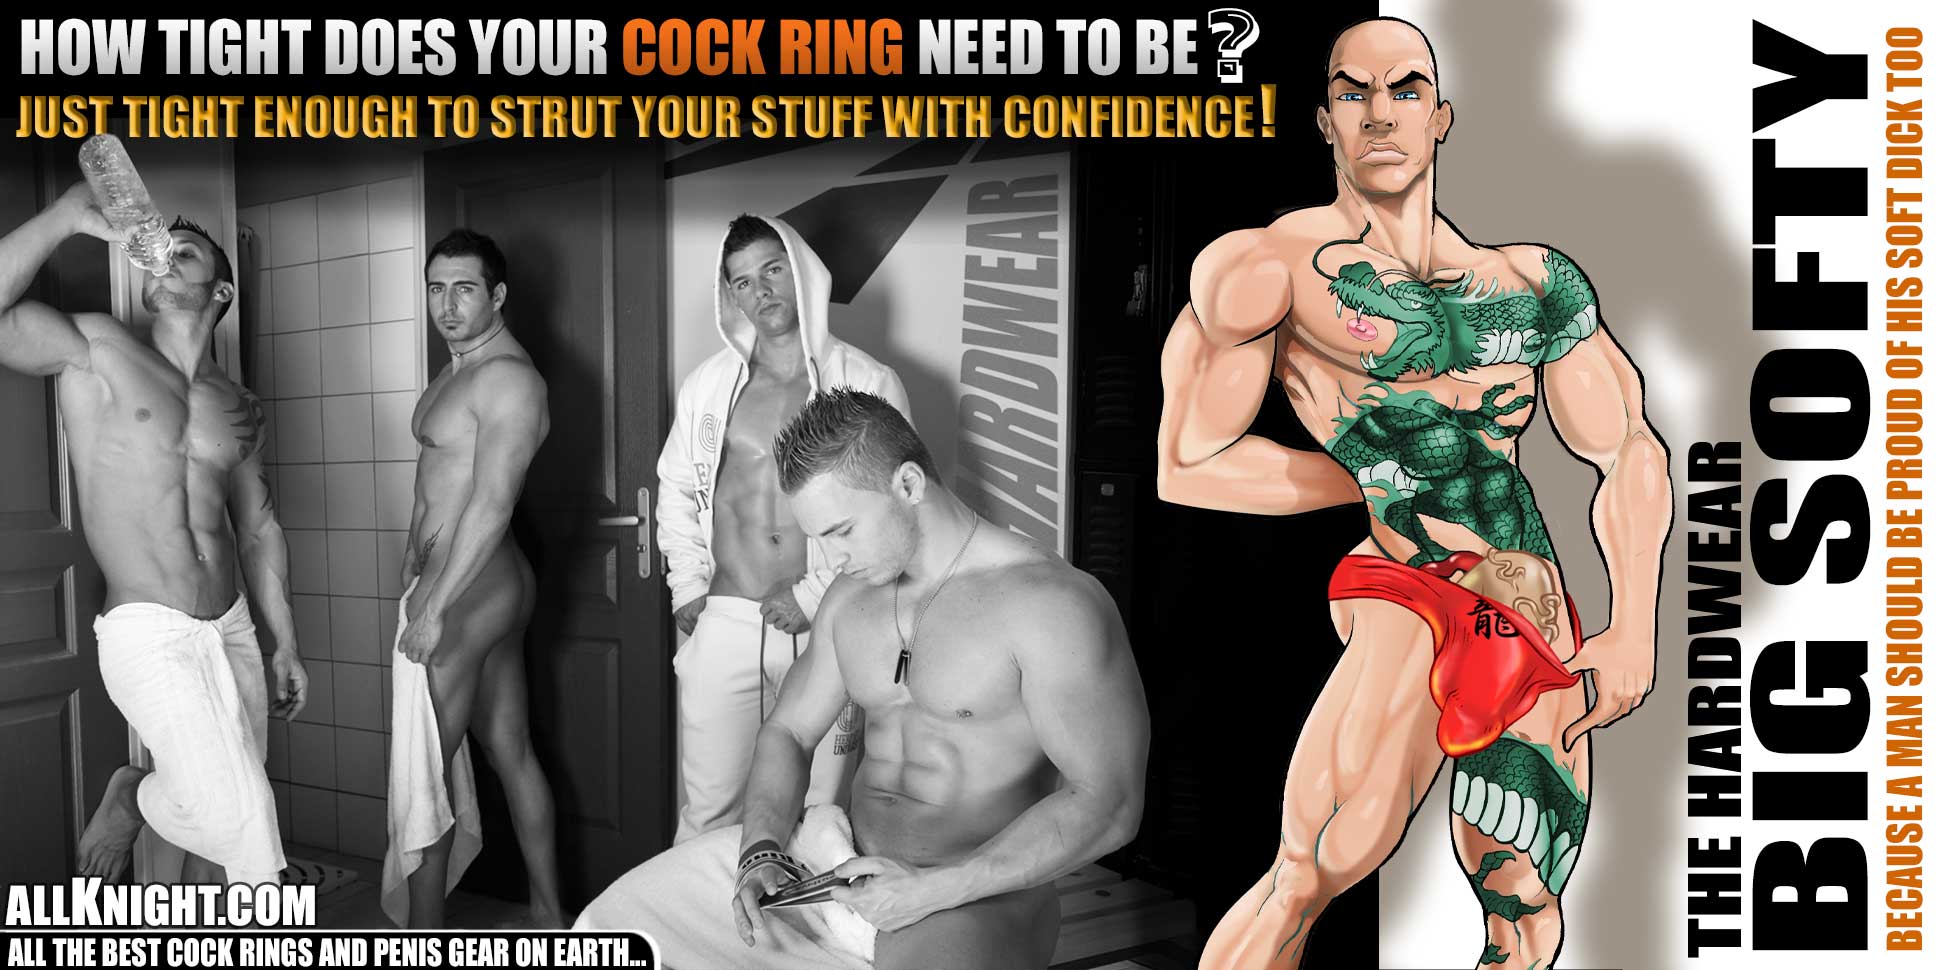 Swagger! Confidence! Big Dick Energy! These are just a few of the super powers a Hardwear All Day Cock Ring can give you.